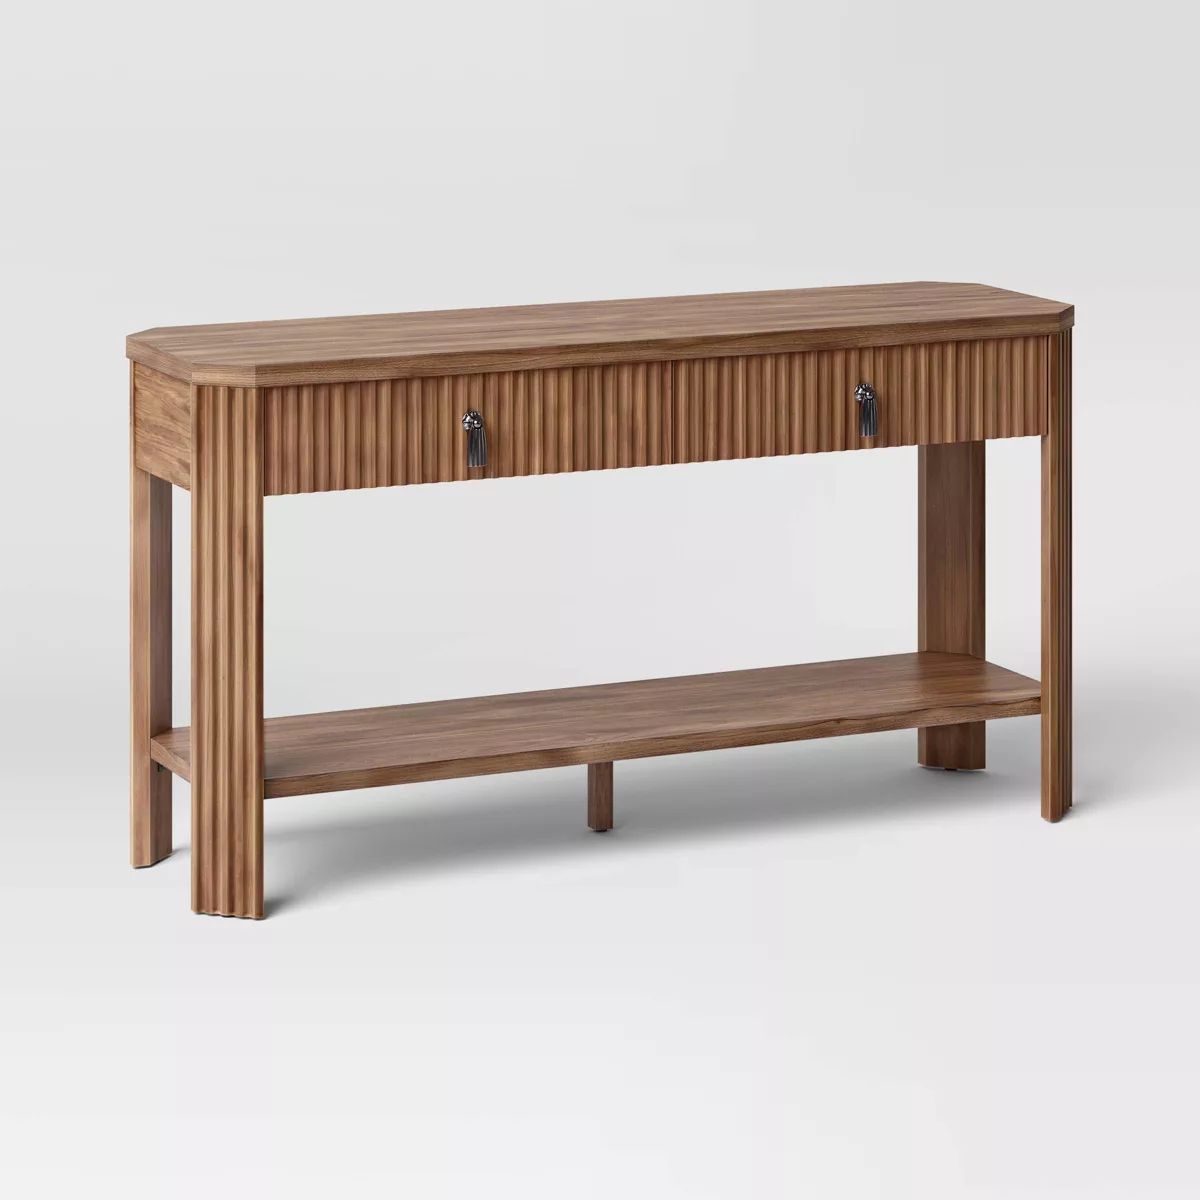 Laguna Nigel Fluted Wooden Console Table Brown - Threshold™ designed with Studio McGee | Target